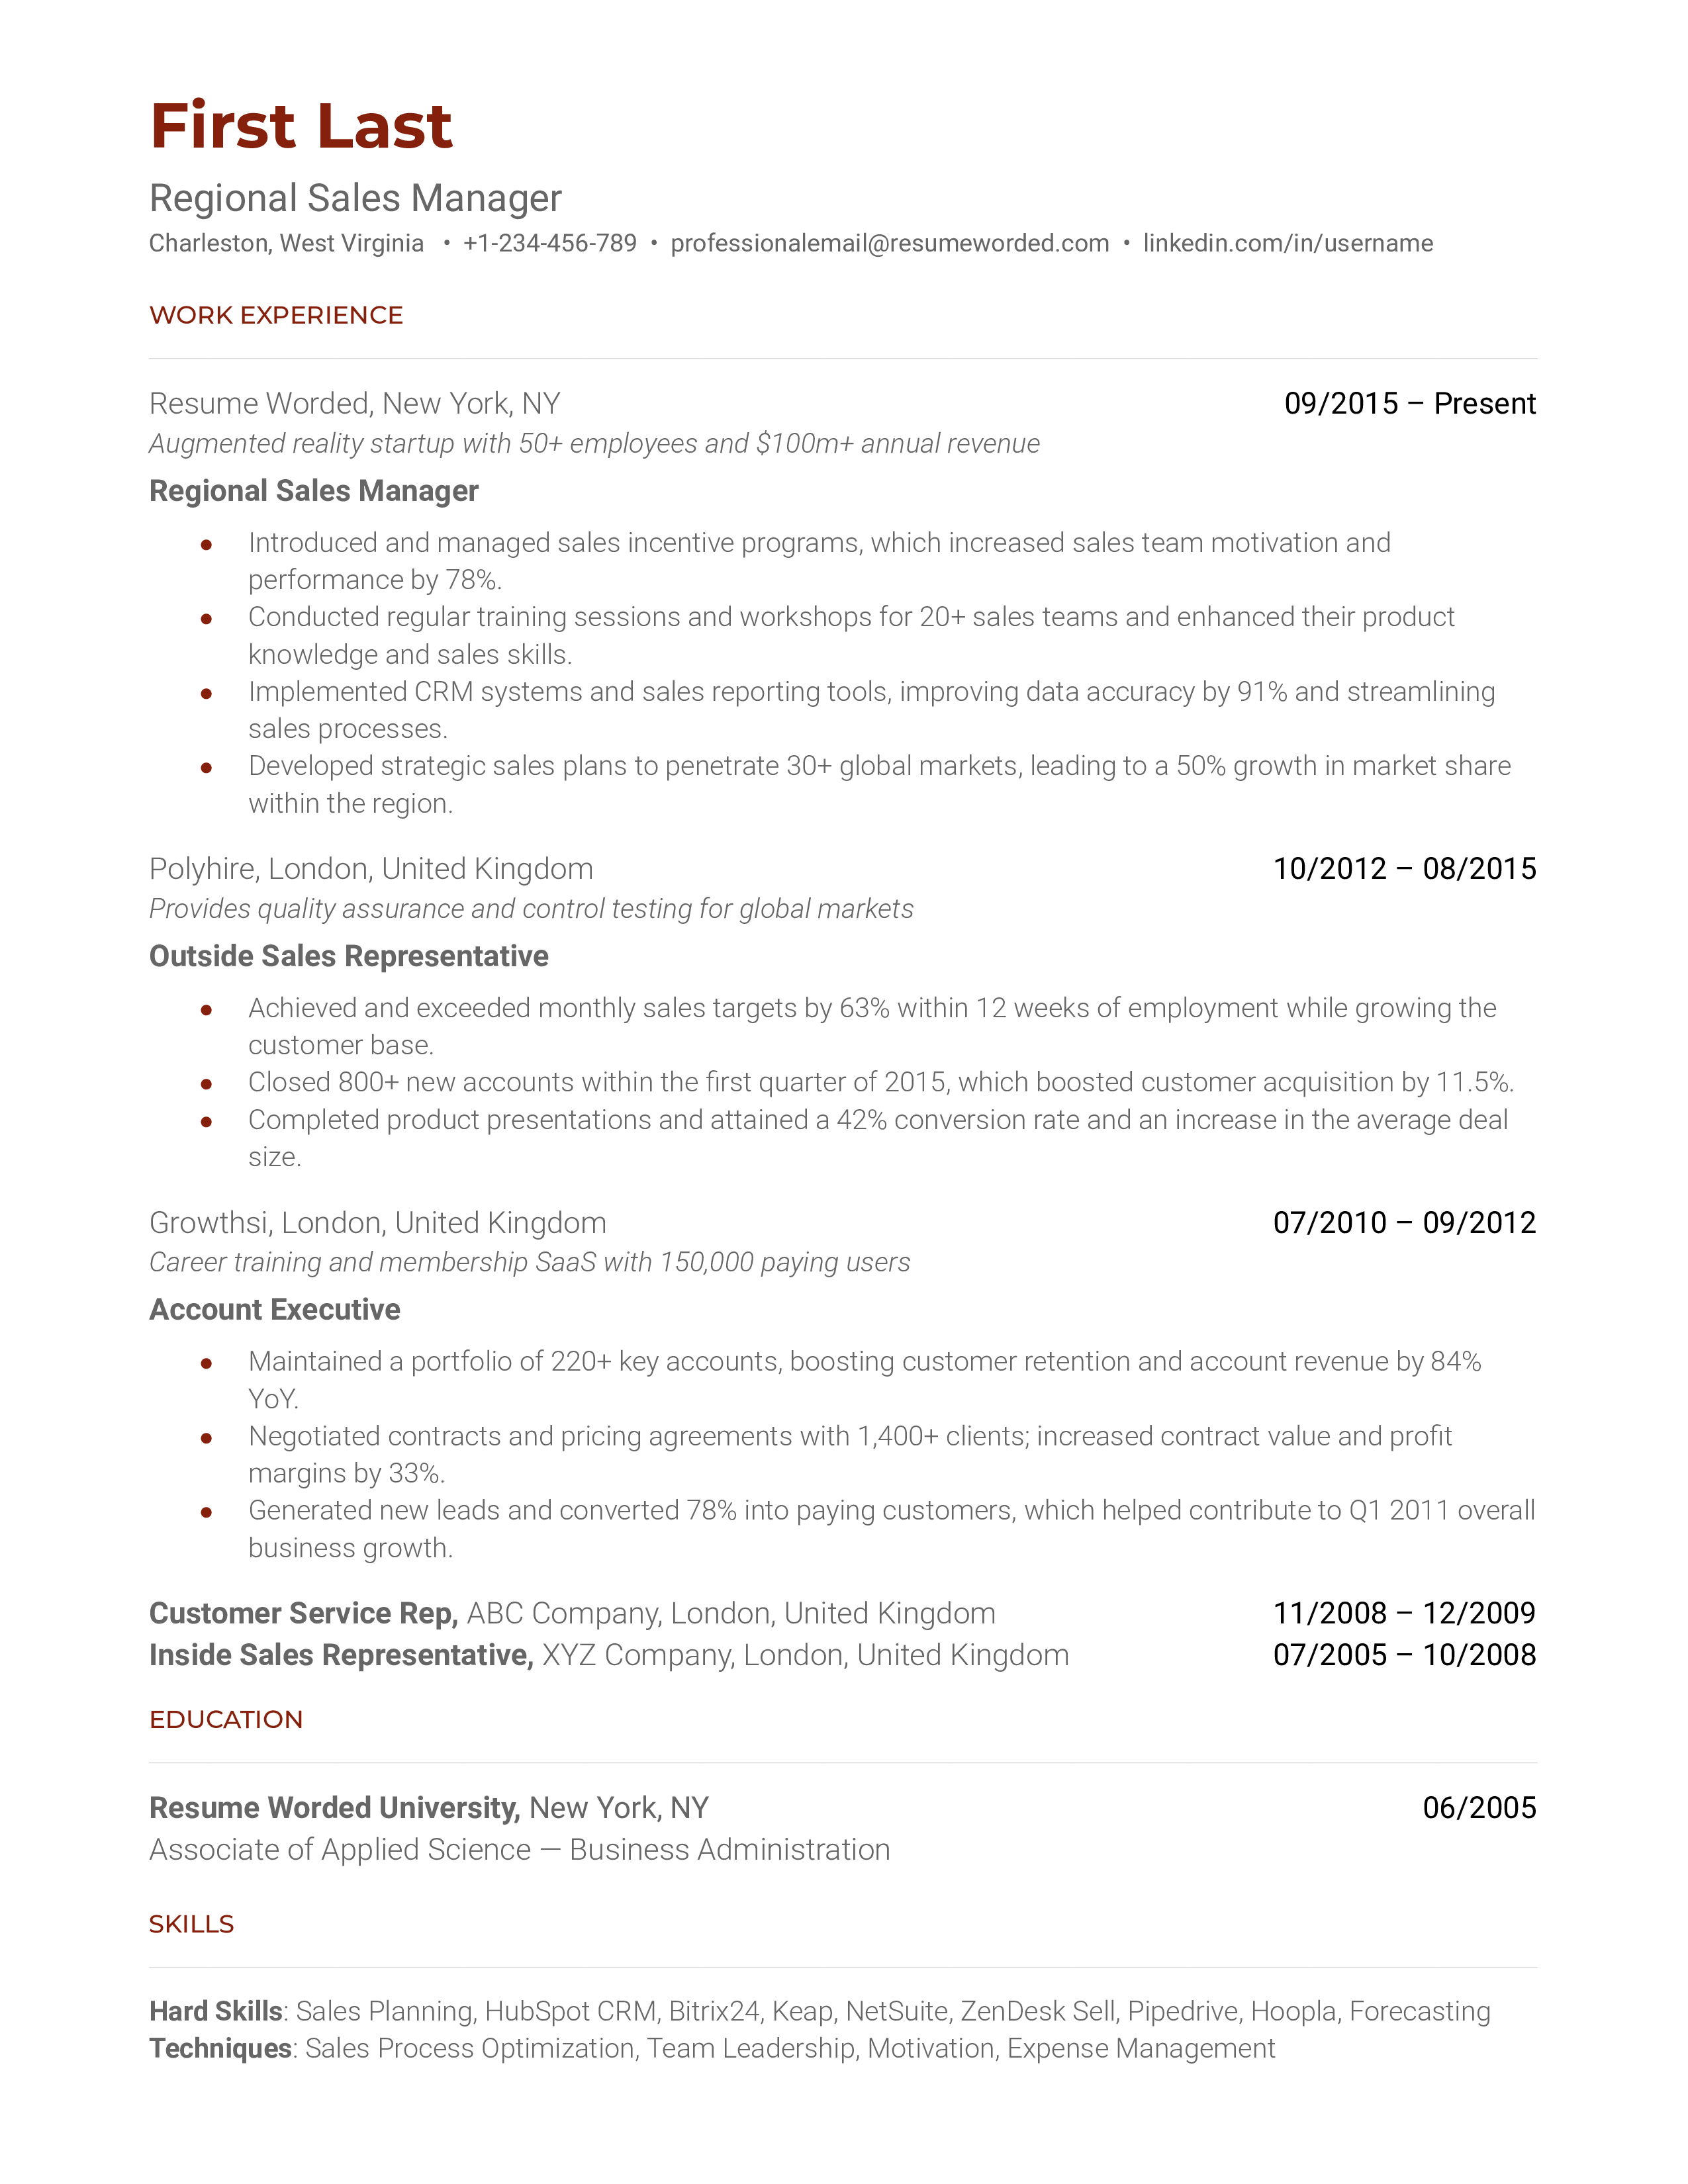 A CV screenshot for a Regional Sales Manager role